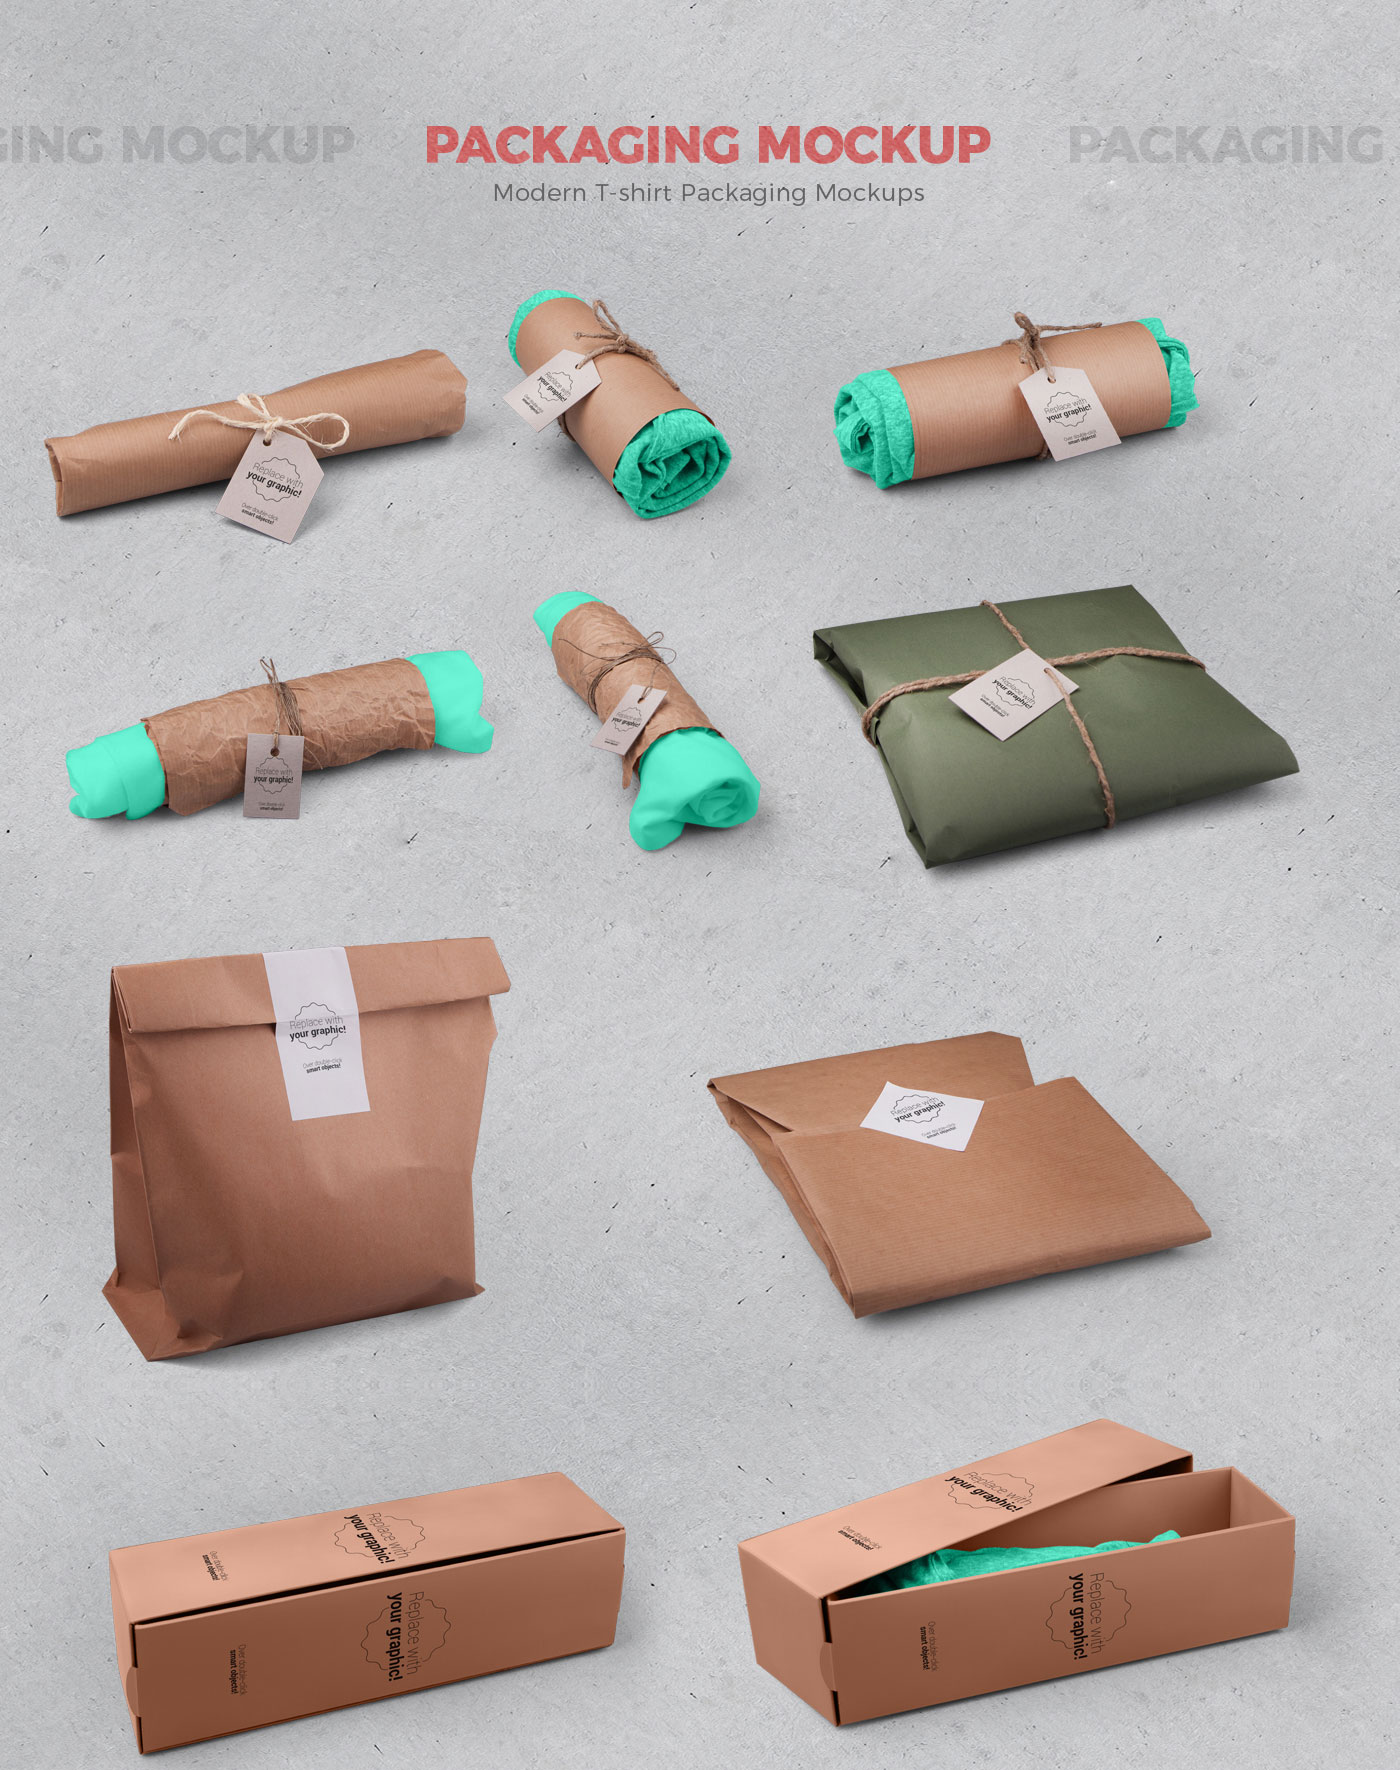 Download T-shirt and Packages Mockups and Hero Images Scene Generator / Perspective View - CSForm